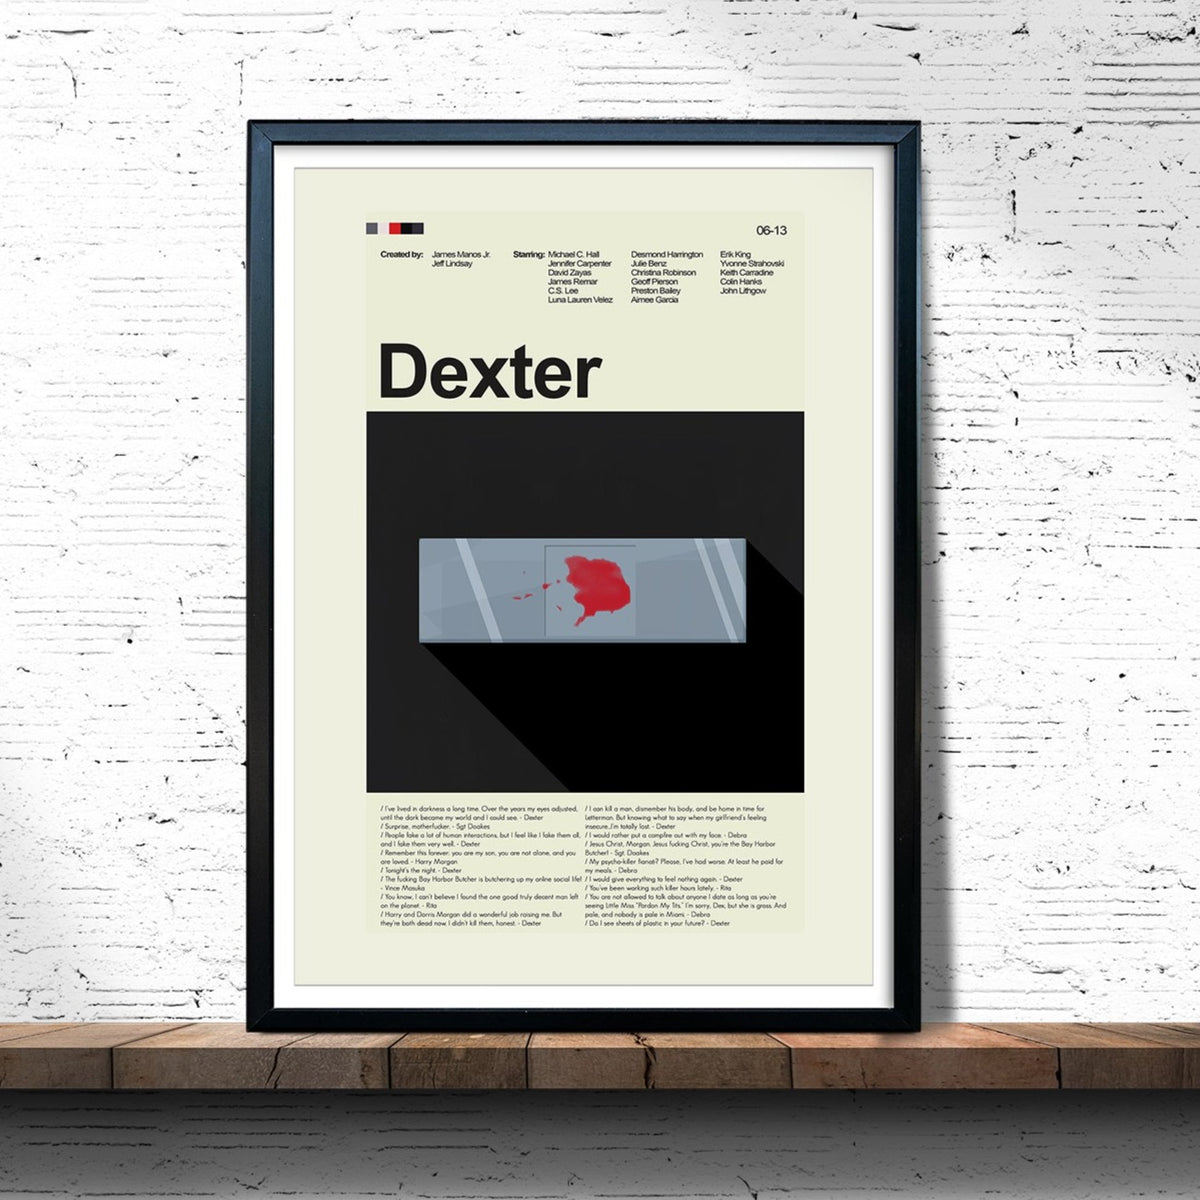 Dexter - Glass Slide | 12"x18" or 18"x24" Print only